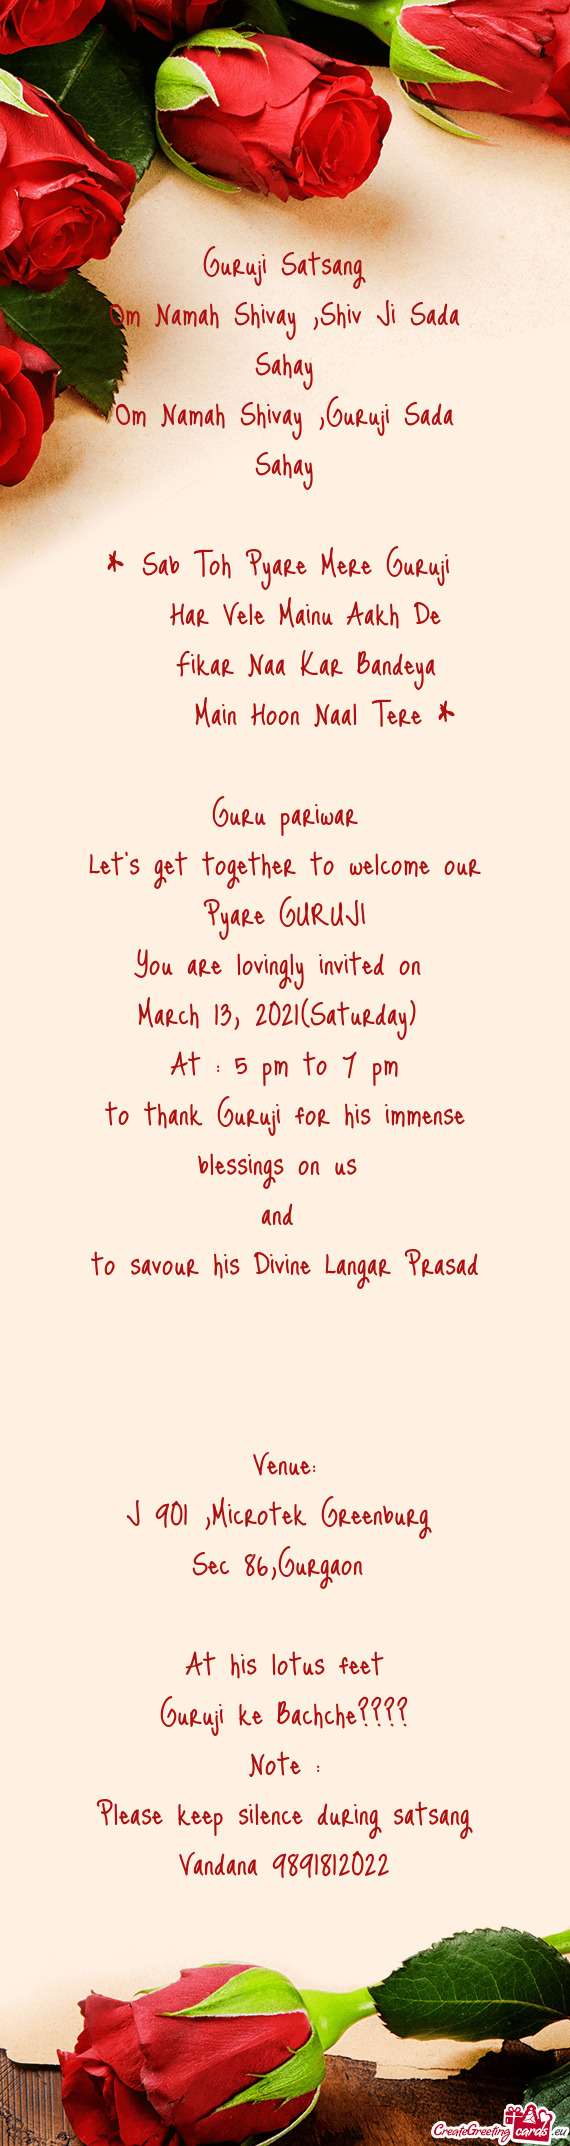 Let’s get together to welcome our Pyare GURUJI